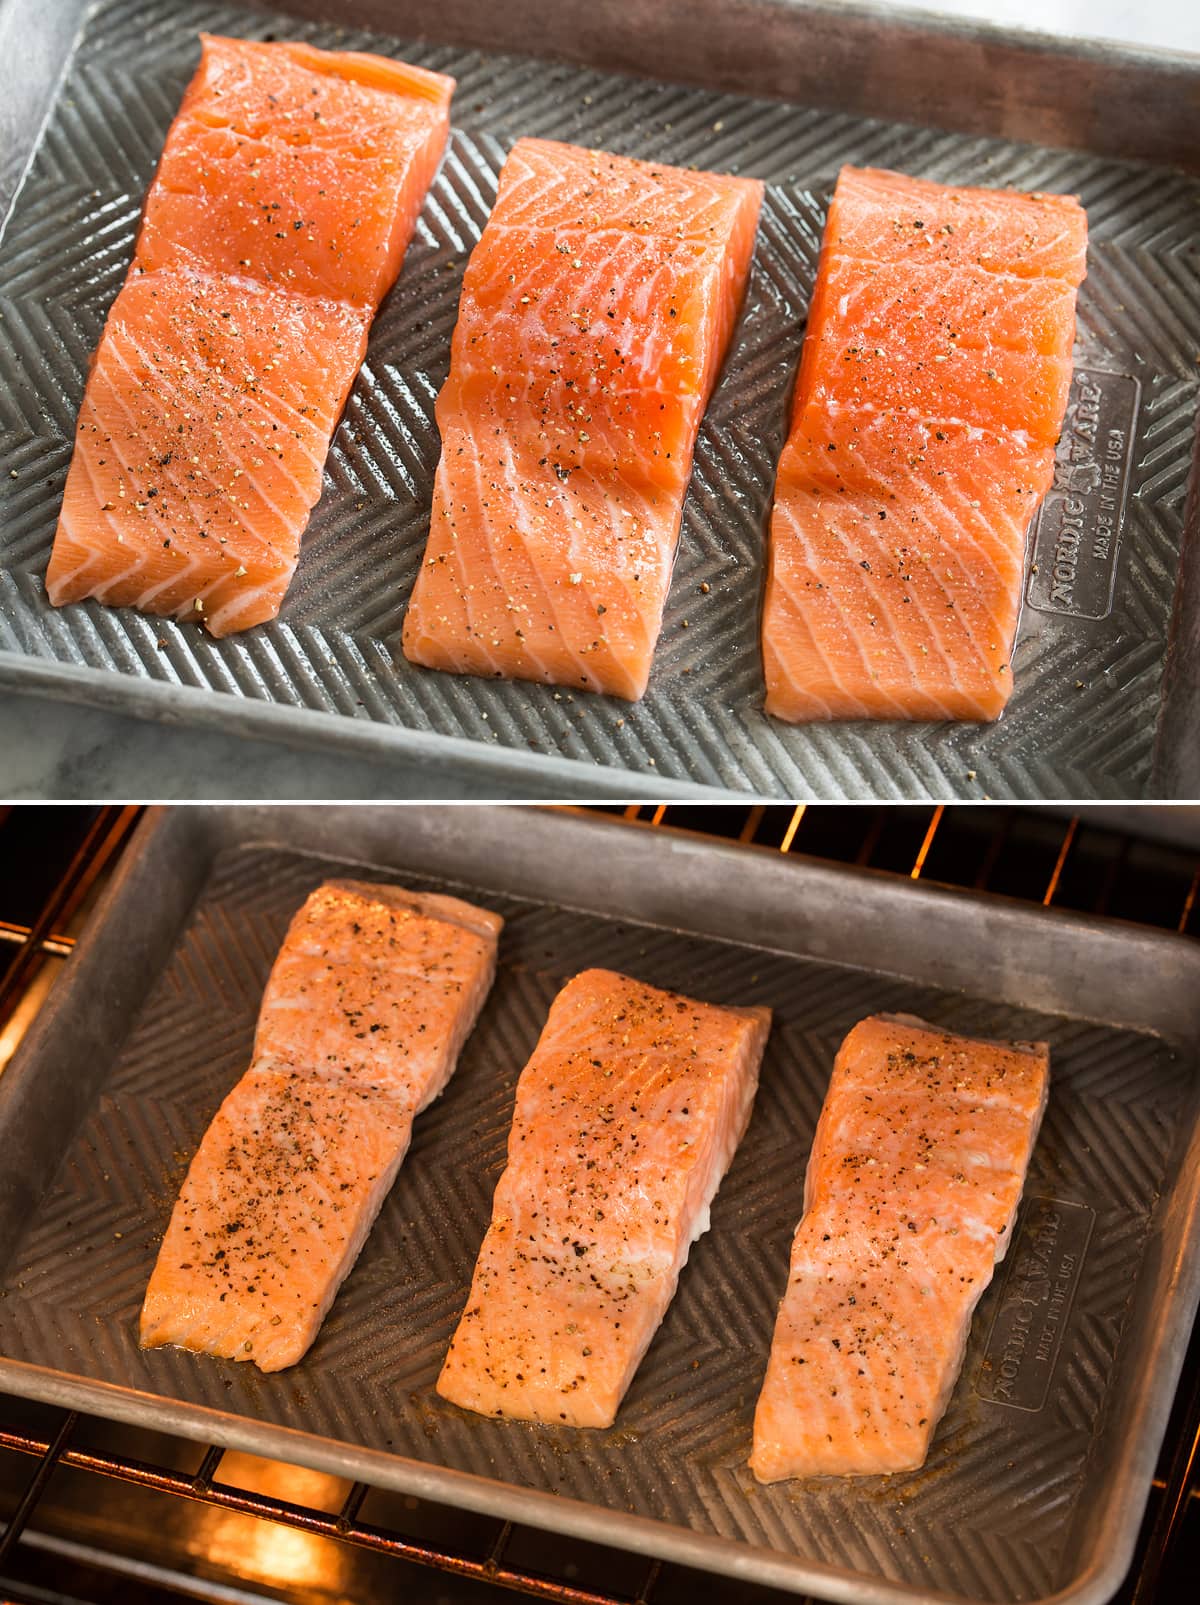 Salmon shown before and after cooking in the oven on a baking sheet.